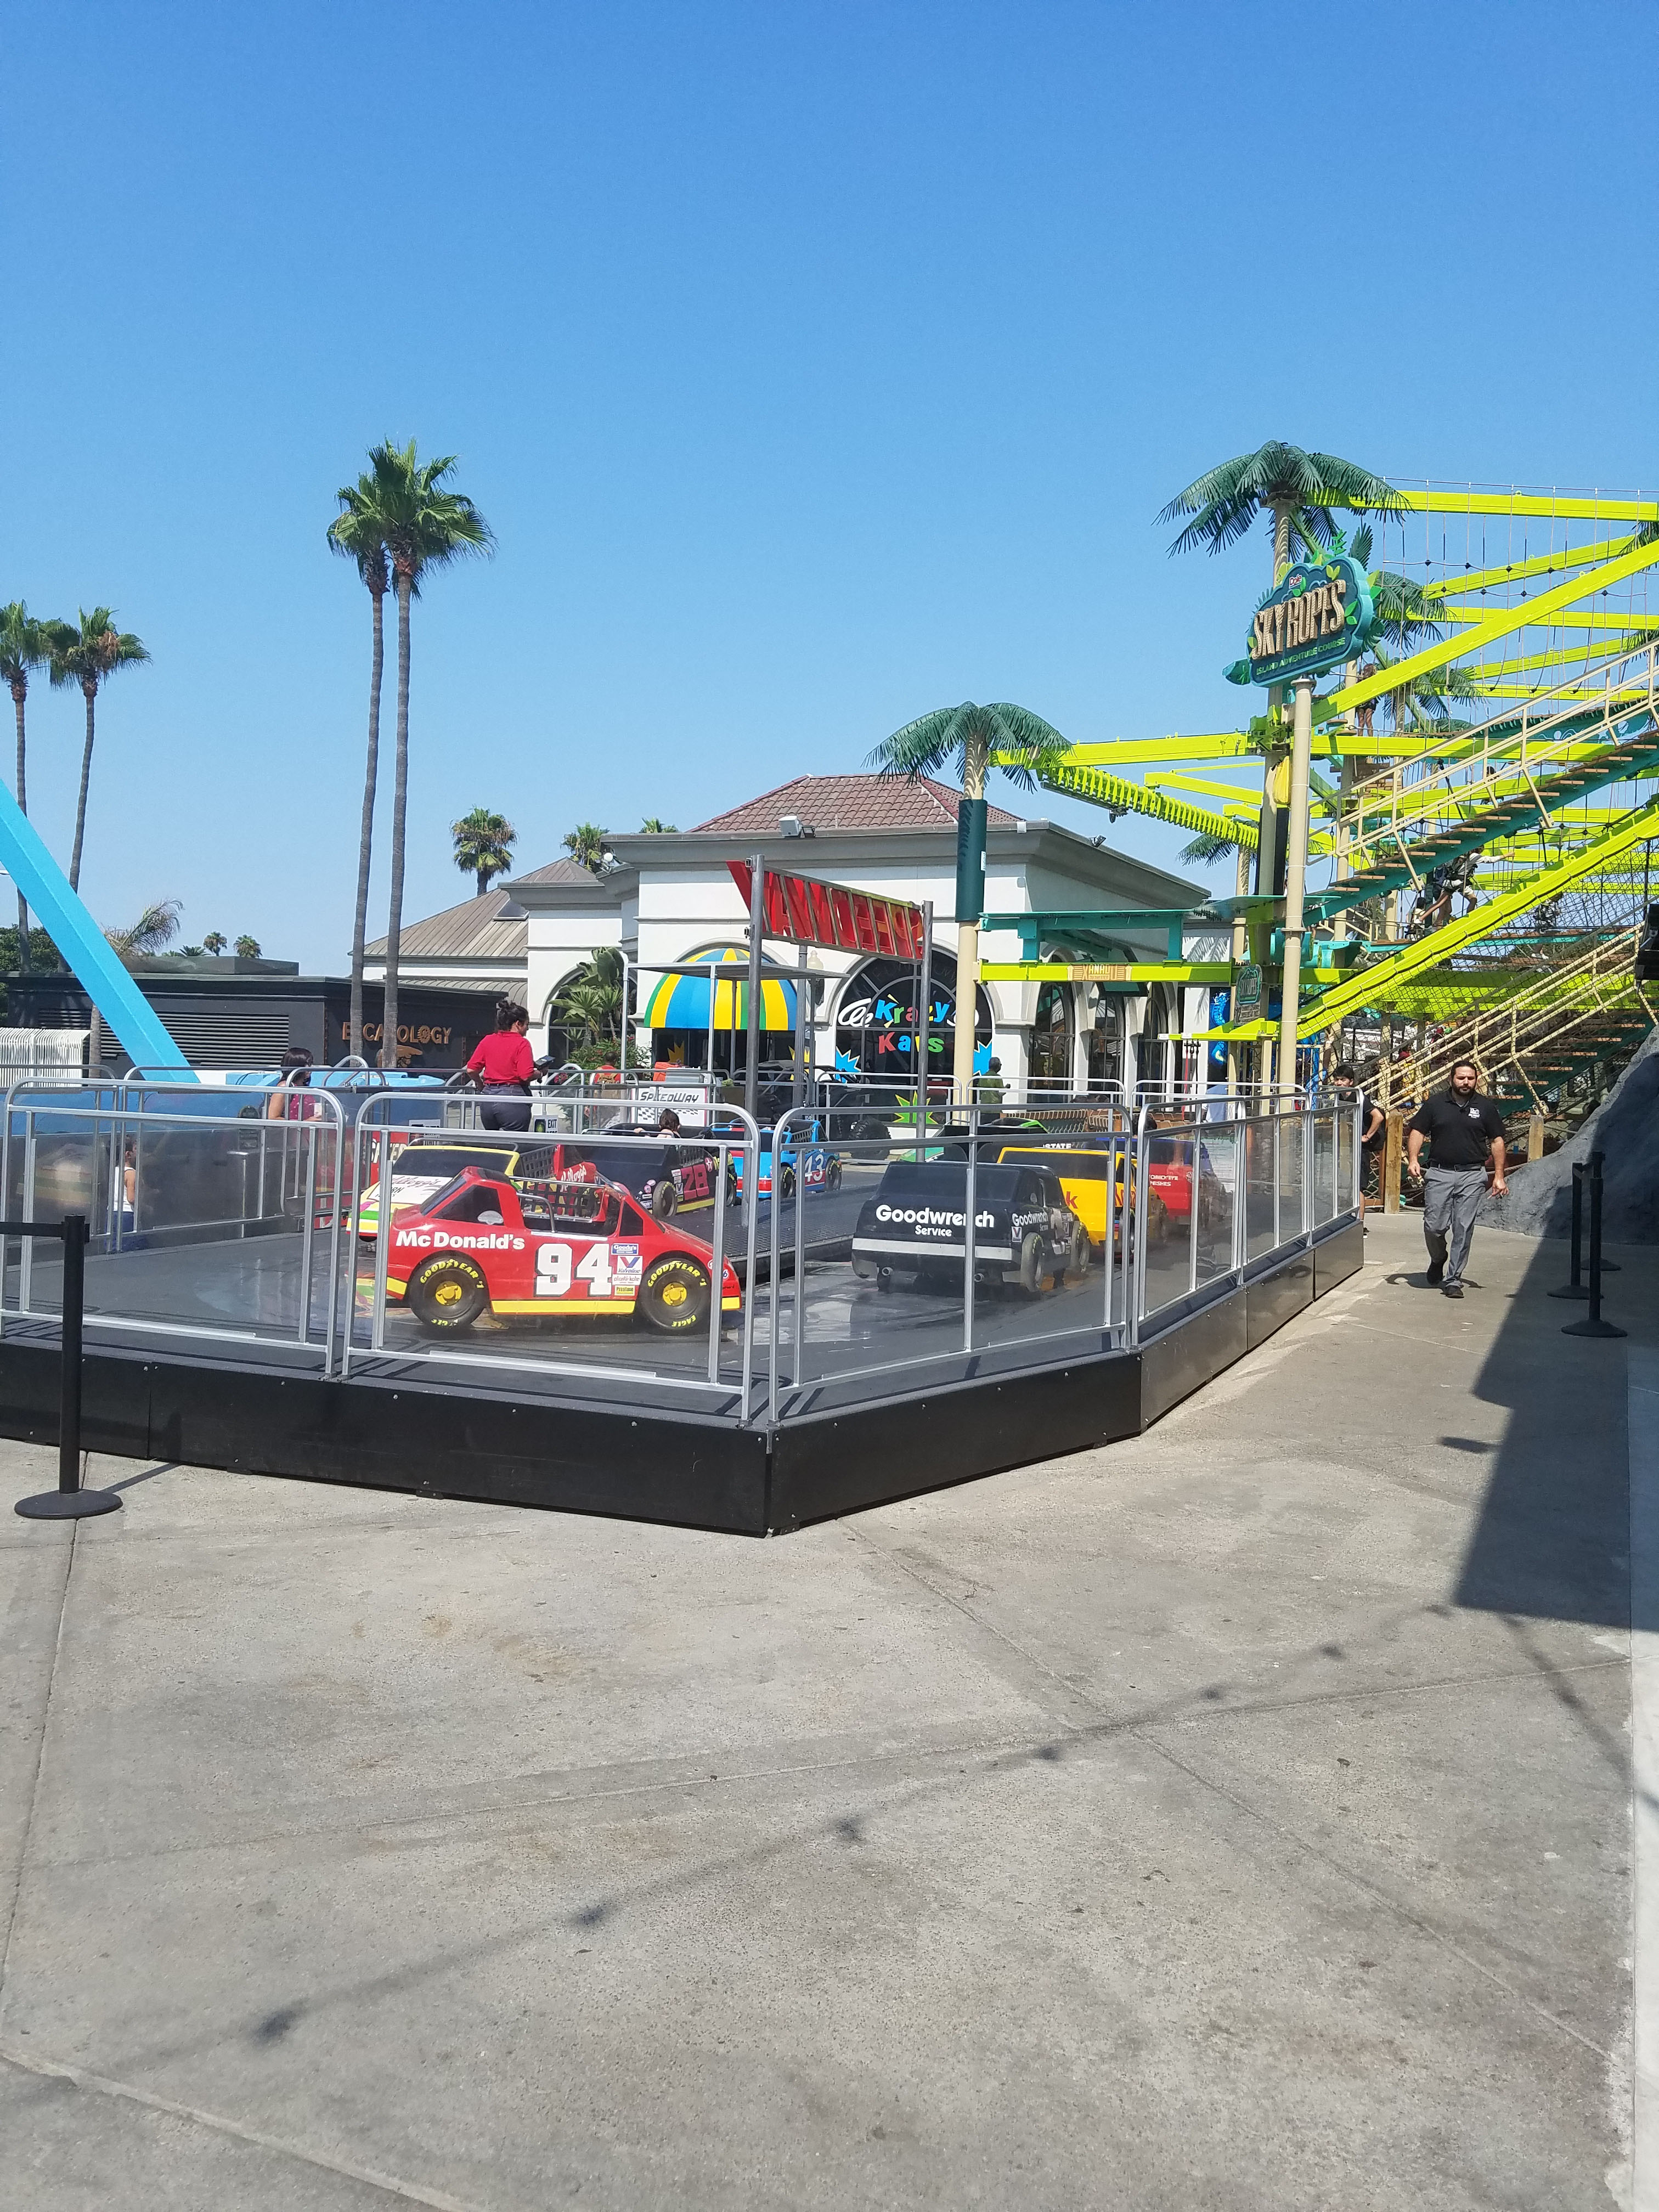 Guide to San Diego’s Belmont Park